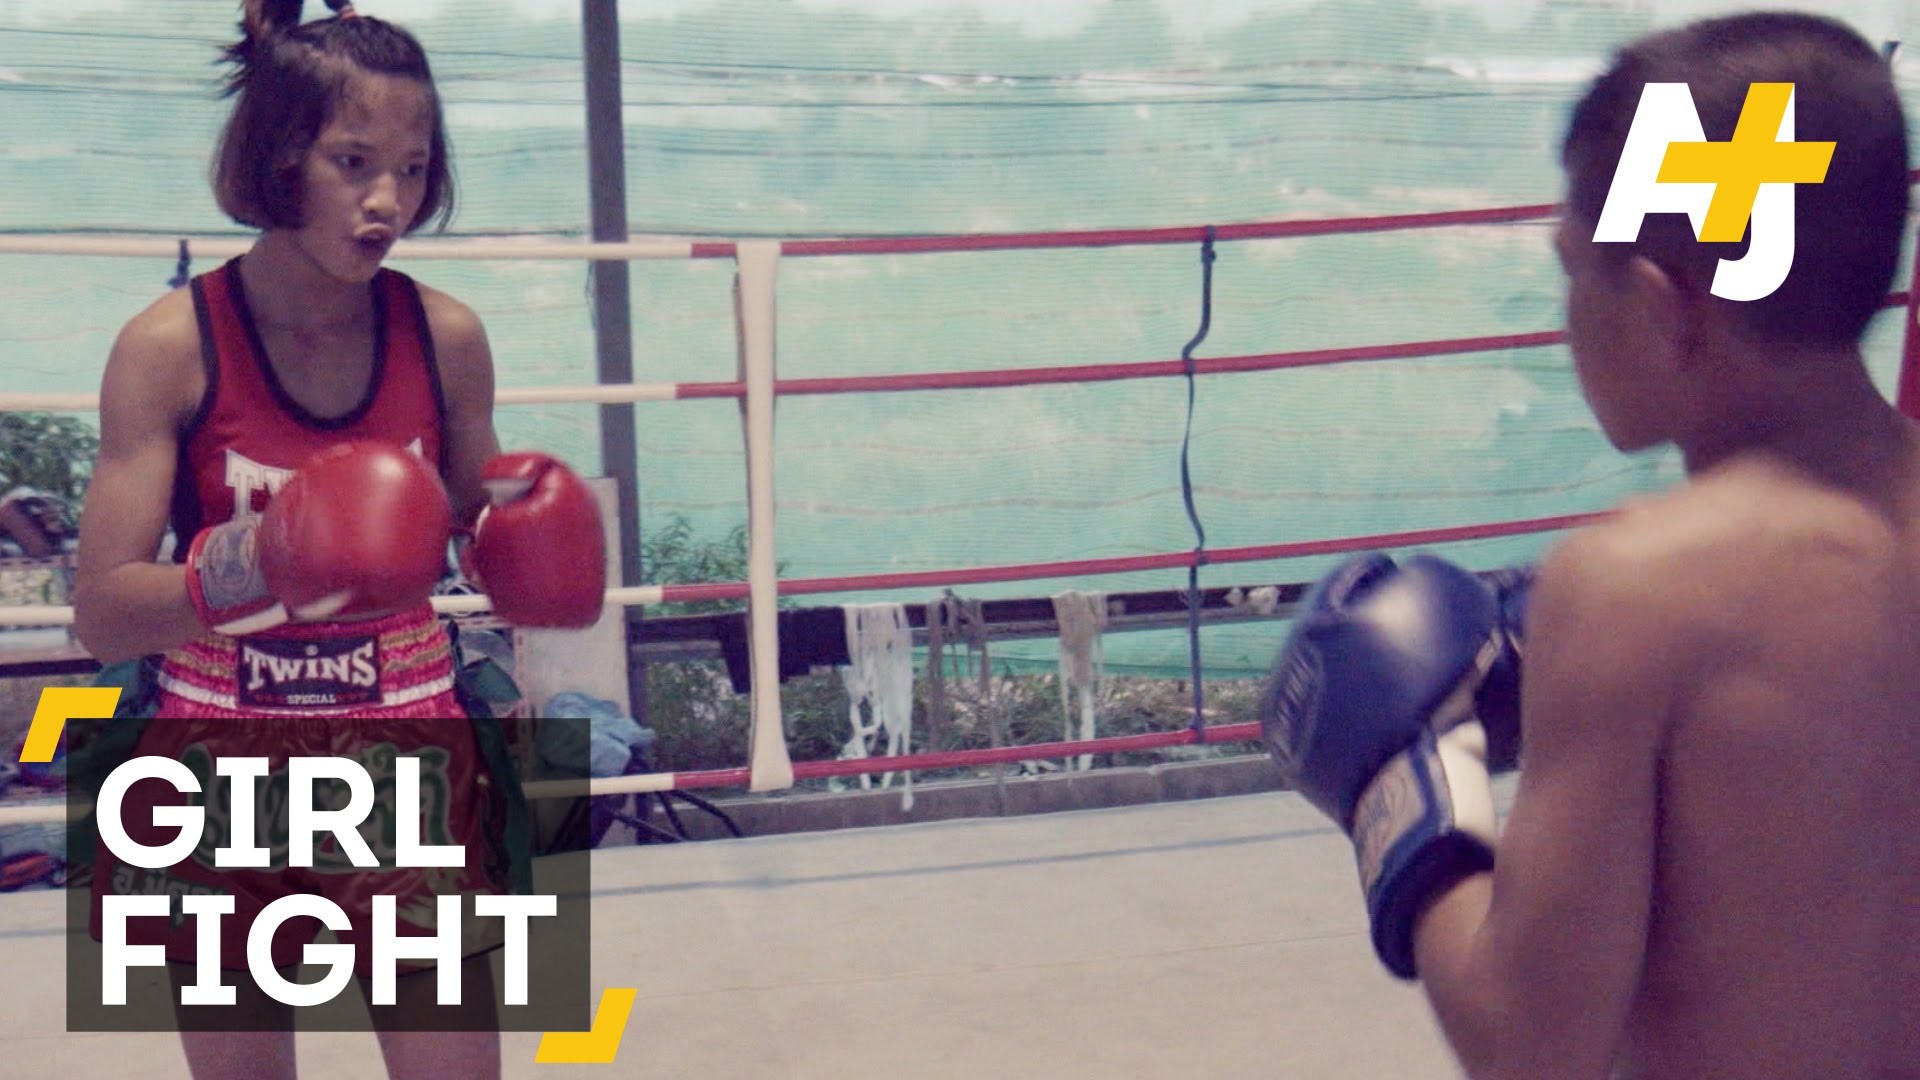 1920x1080 Phet Jee Jaa is an excellent Muay Thai fighter and was known as the girl  who fought boys.